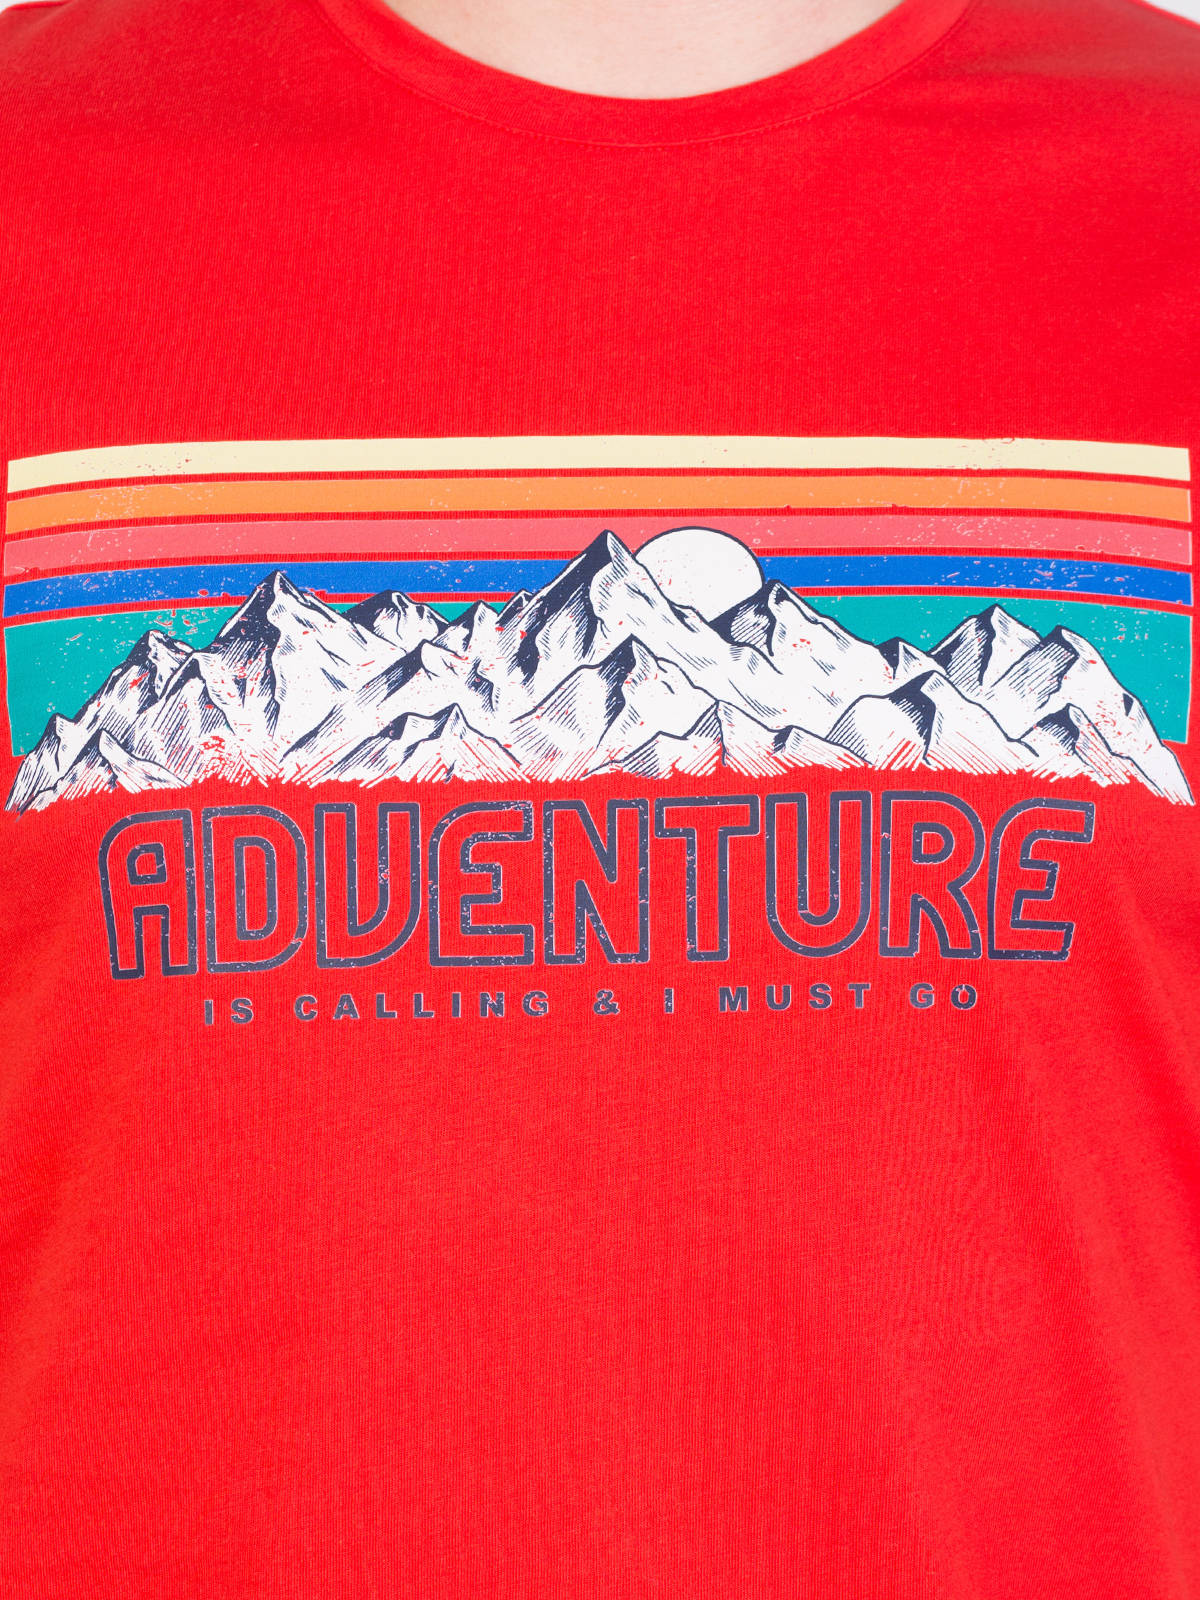 Red tshirt with adventure print - 96418 € 16.31 img3